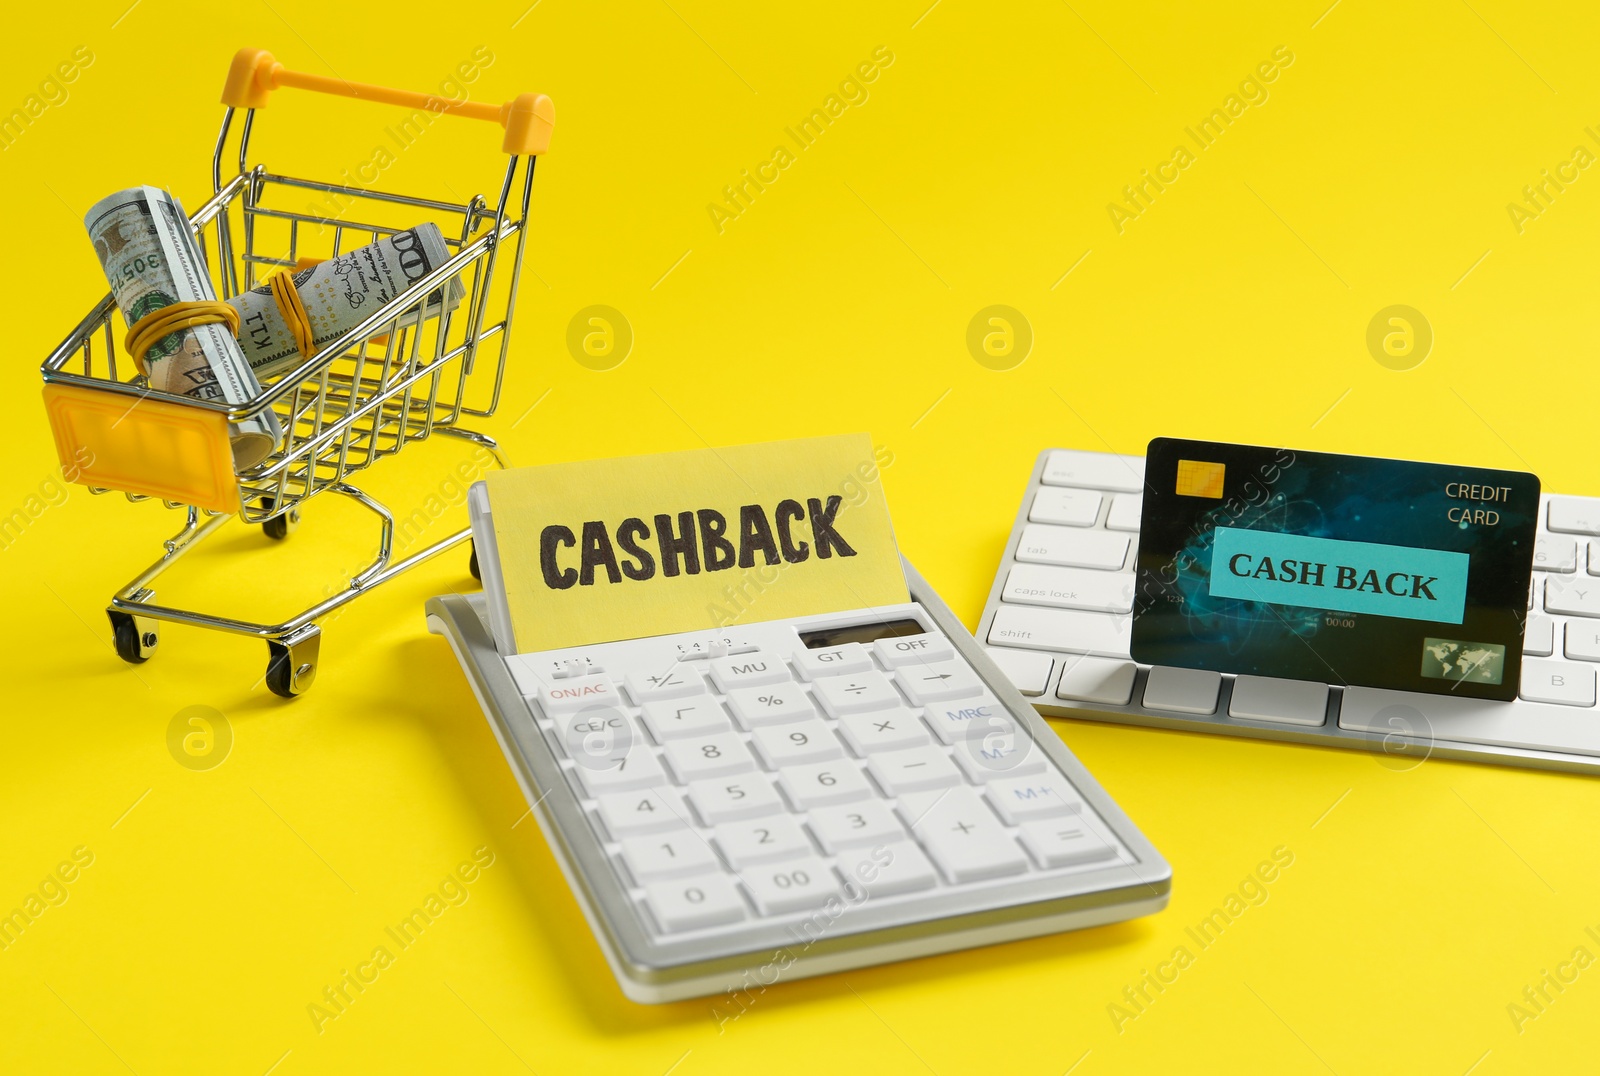 Photo of Calculator, keyboard, credit card and dollar banknotes in shopping cart on yellow background. Cashback concept